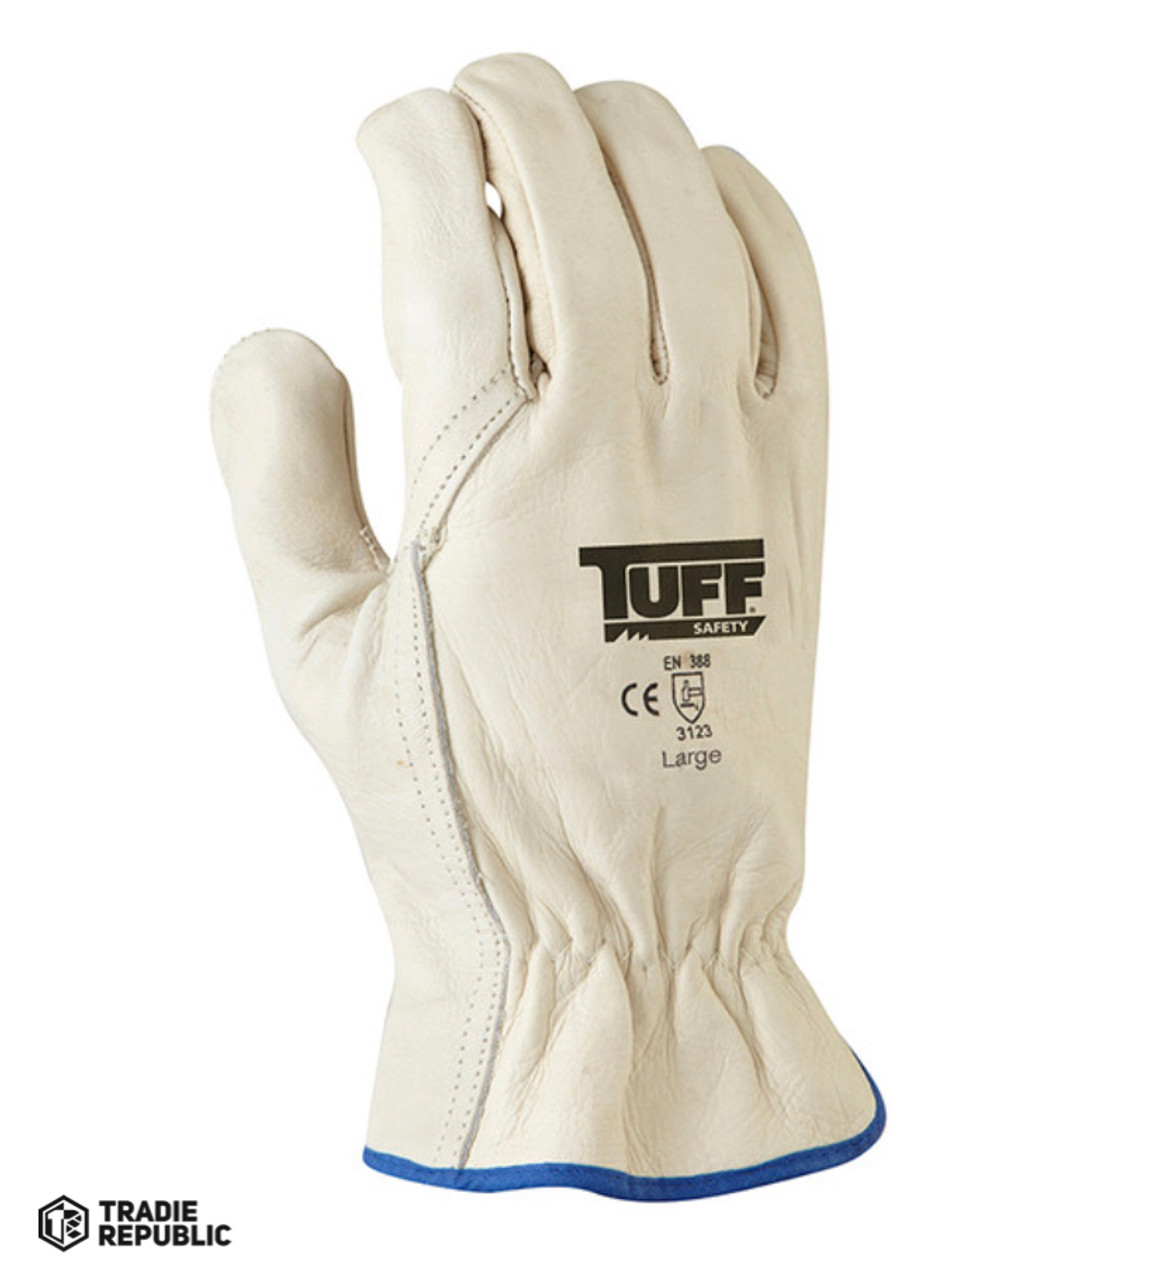 TRG-10 TUFF Rigger Glove - Size 10 Large